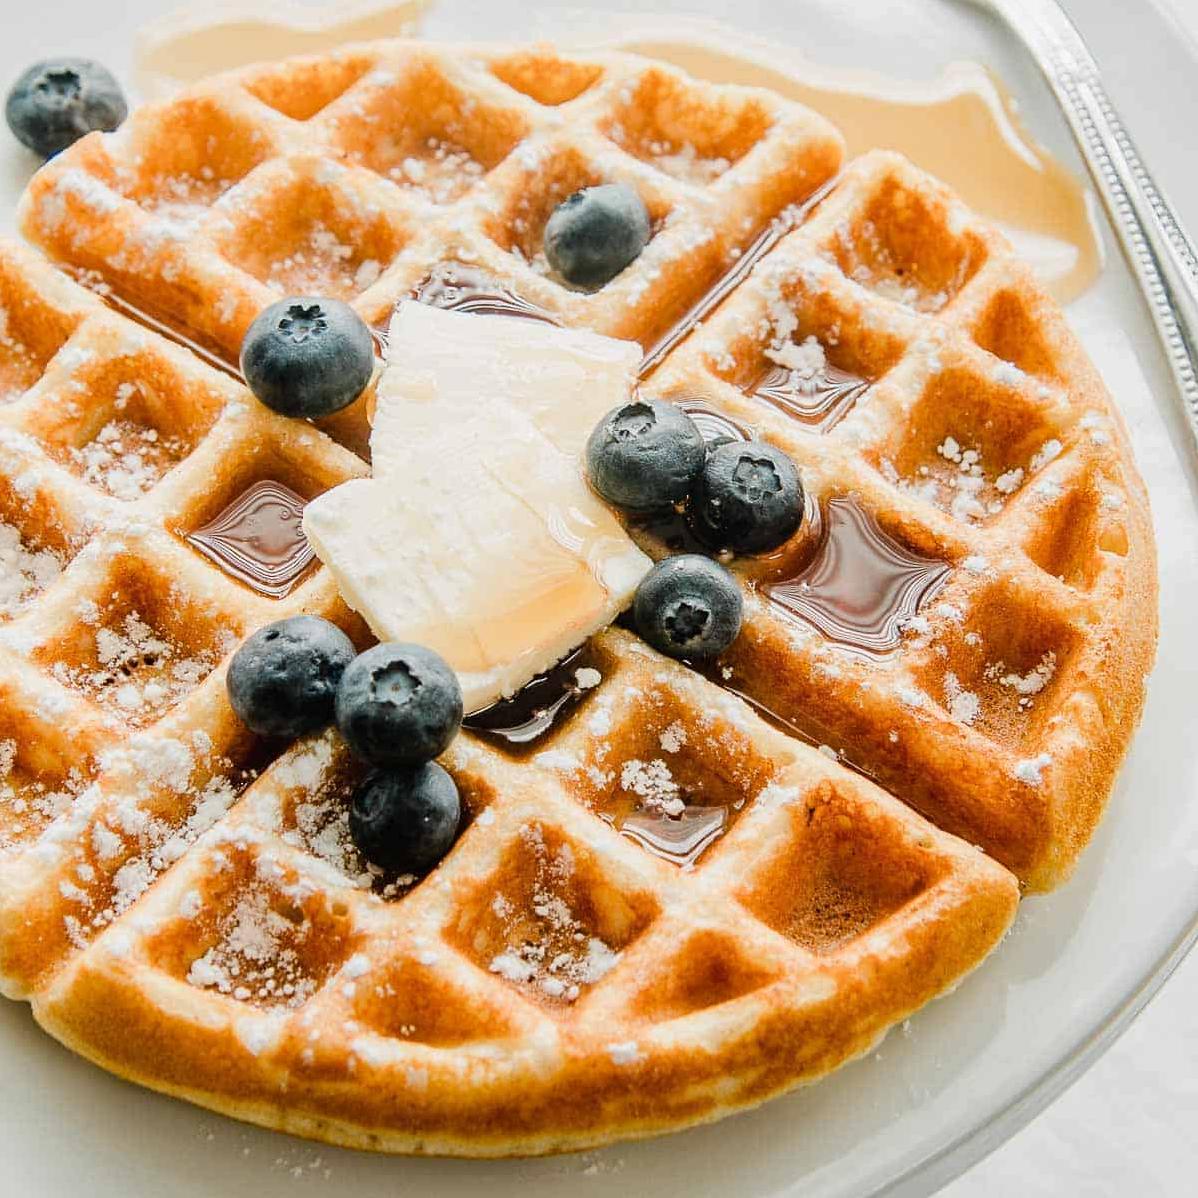  Bite into the perfect gluten-free classic waffle!